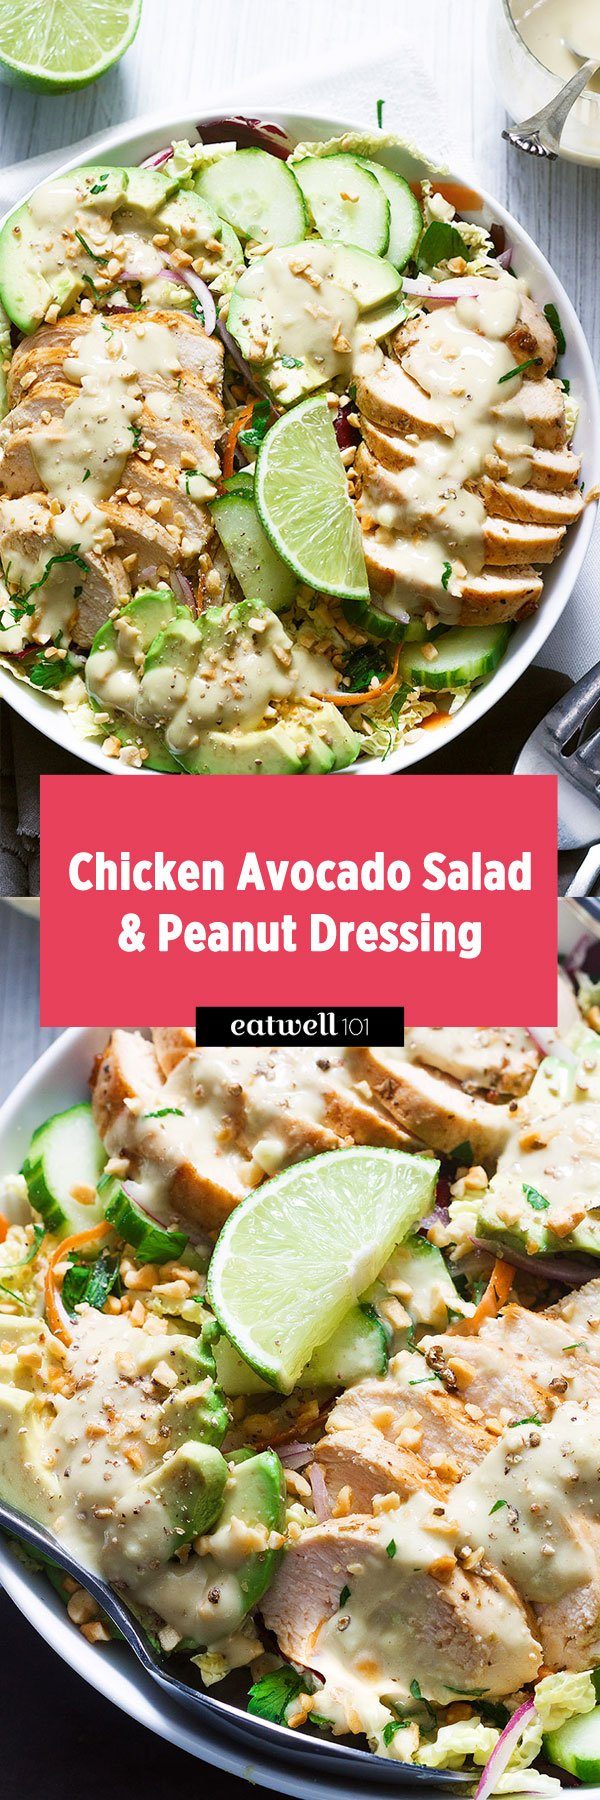 Avocado chicken salad - #avocado #chicken #salad #recipe #eatwell101 - This chicken avocado salad tastes so good you won't believe it's healthy!